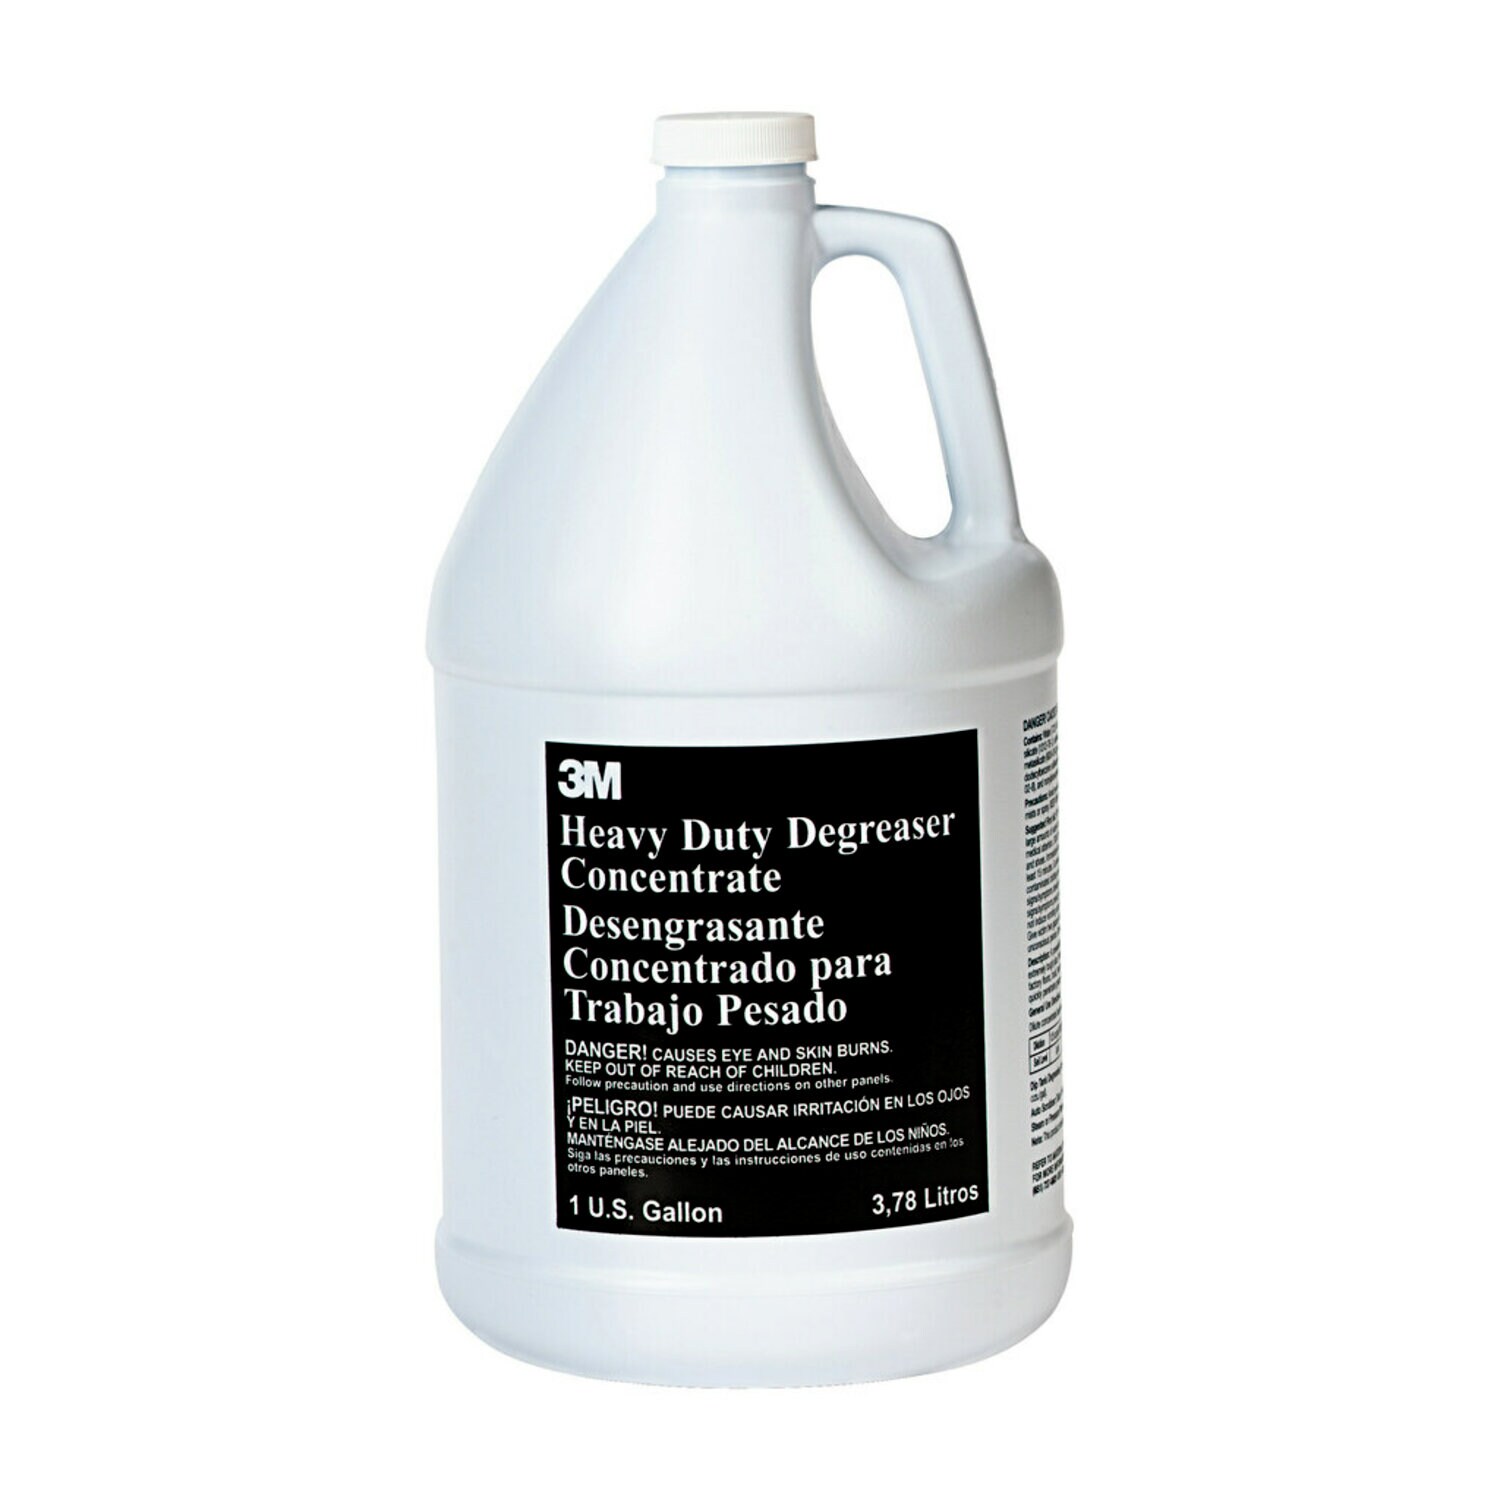 7100077193 - 3M Heavy Duty Degreaser Concentrate 34782, 1 Gallon, 4/Case